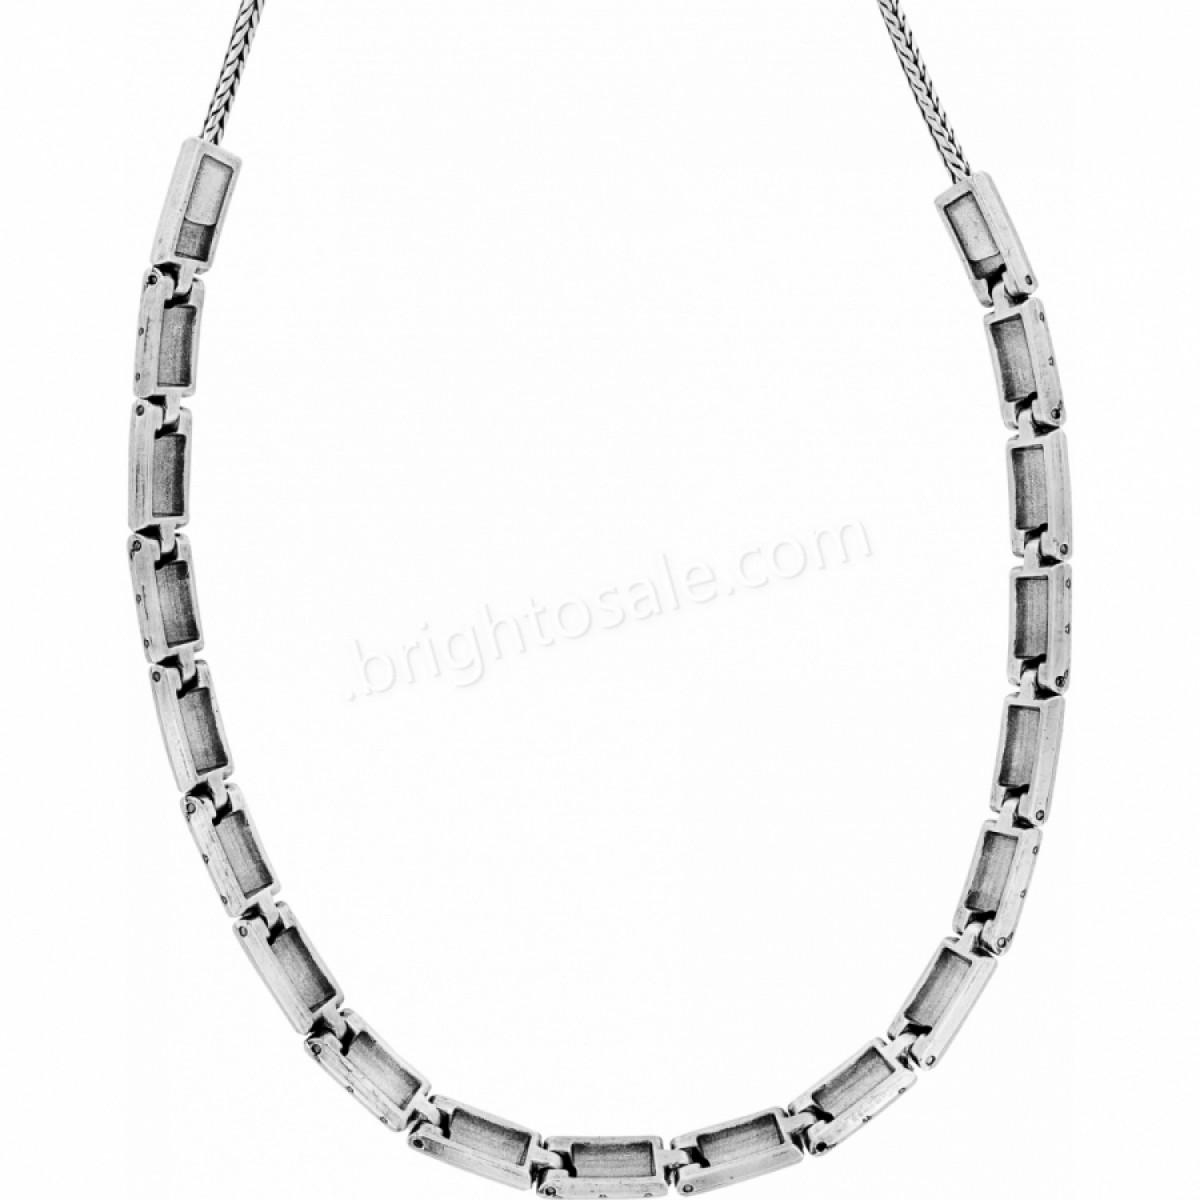 Brighton Collectibles & Online Discount Meridian Swing Necklace - -1